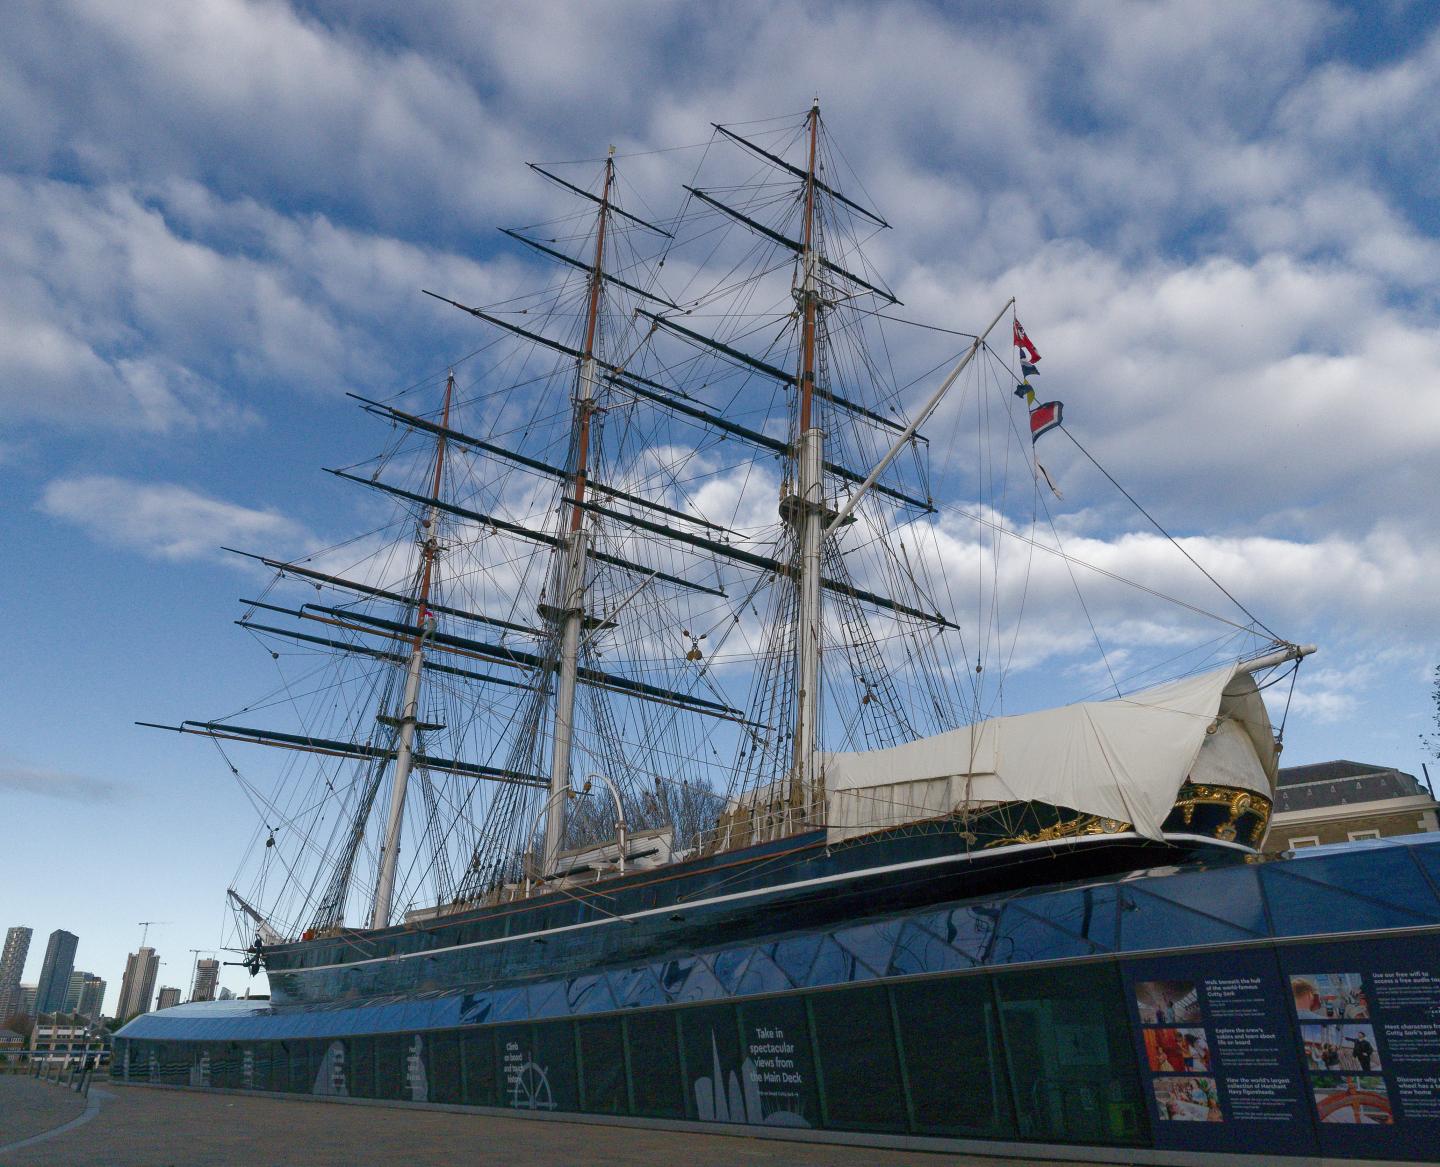 Cutty Sark with poop deck under cover